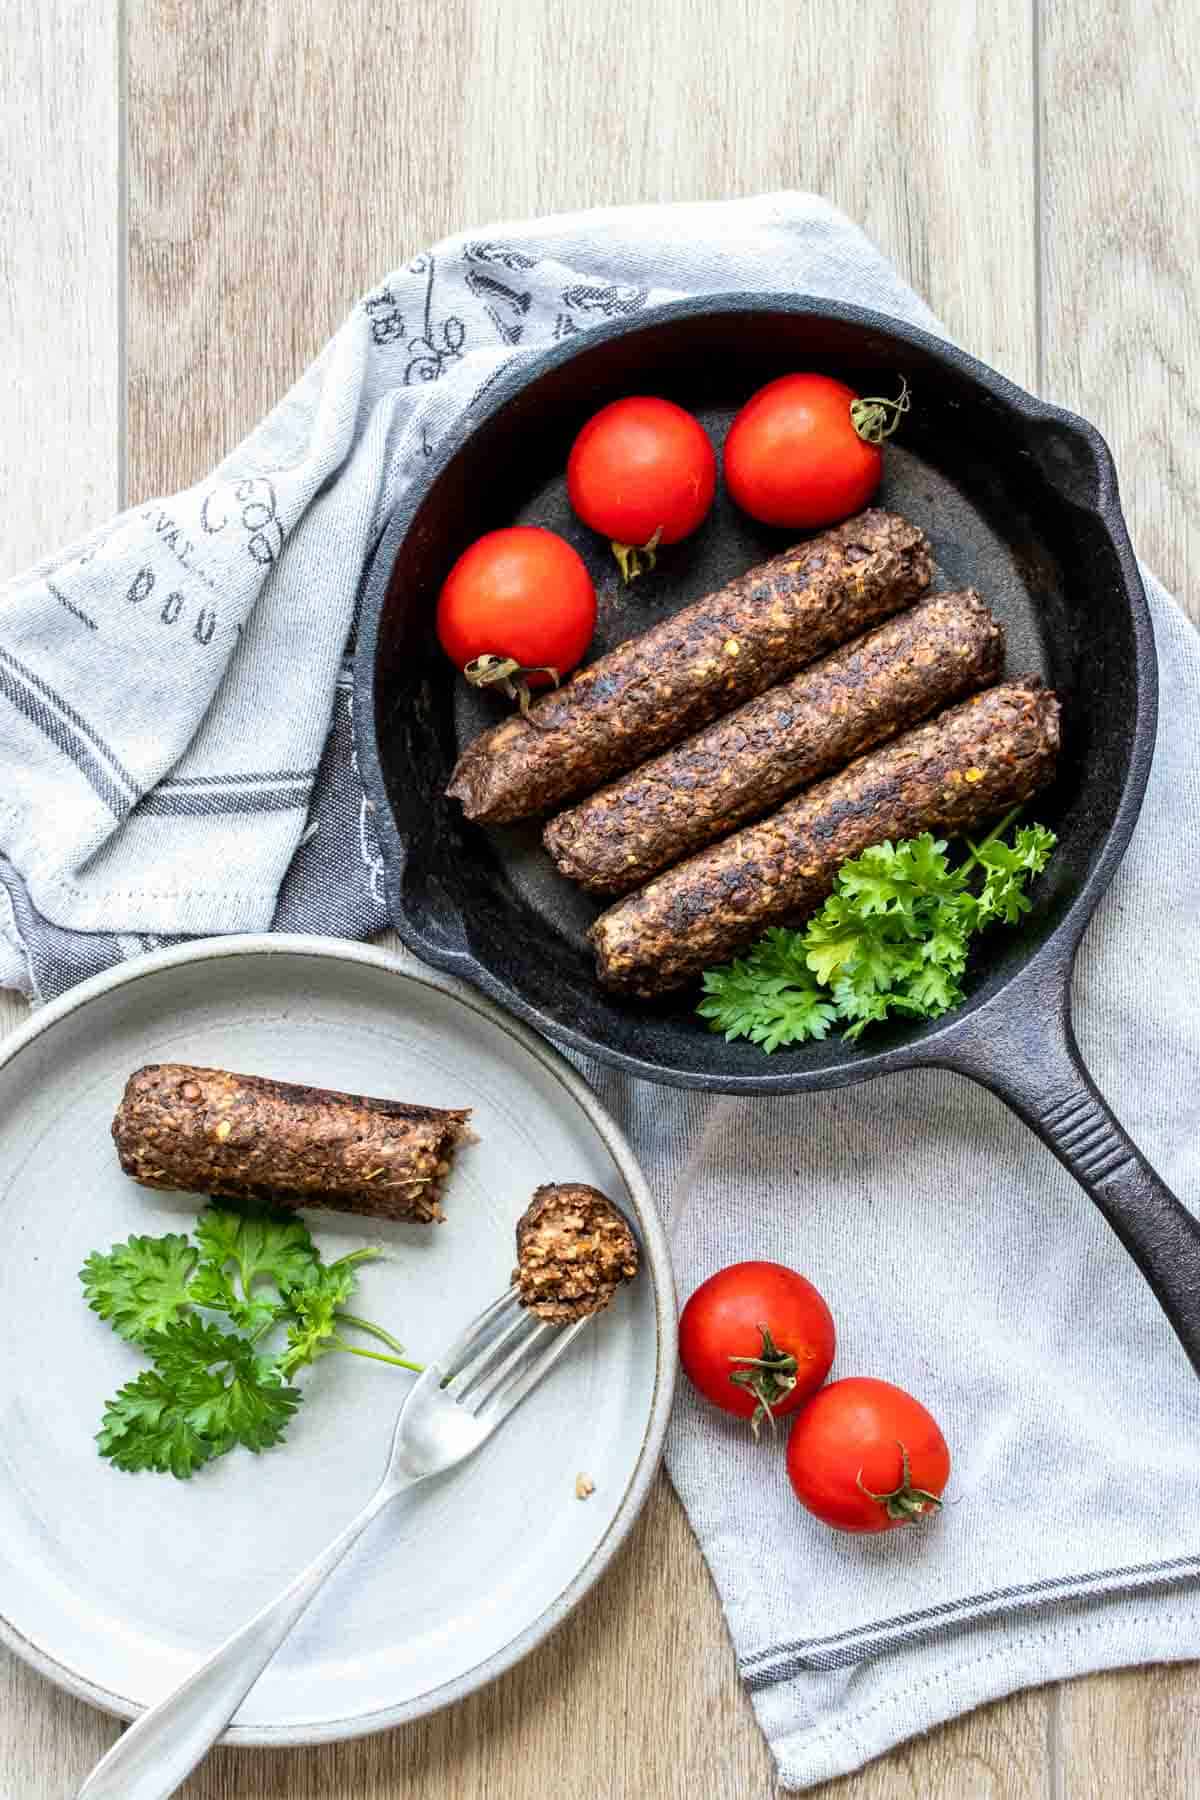 Top view of a cast iron skillet with sausages in it next to a plate with a sausage being eaten